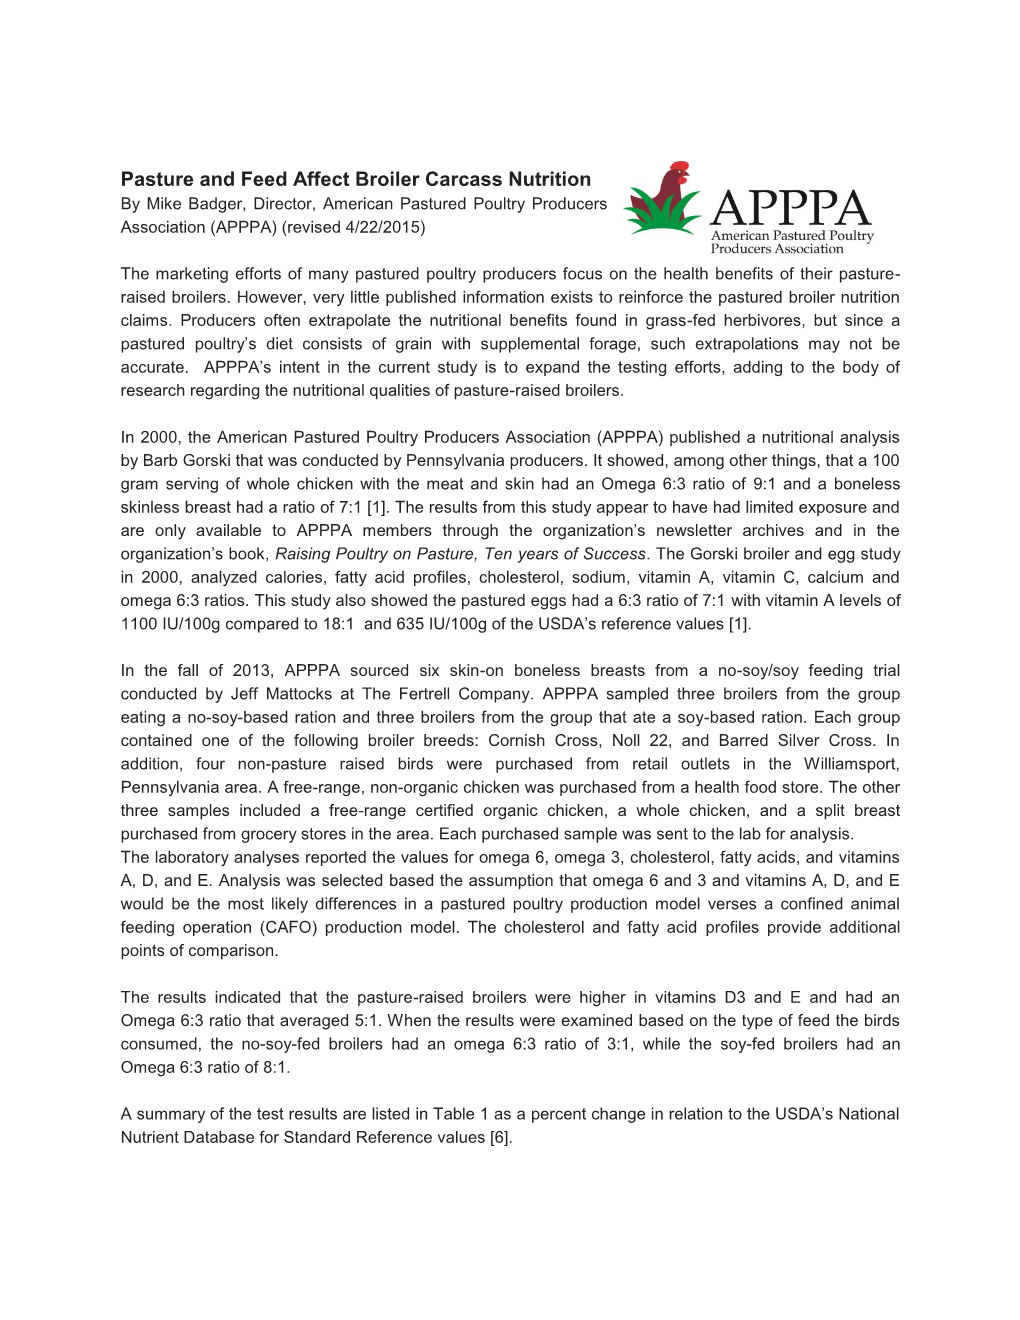 Pasture and Feed Affect Broiler Carcass Nutrition by Mike Badger, Director, American Pastured Poultry Producers Association (APPPA) (Revised 4/22/2015)